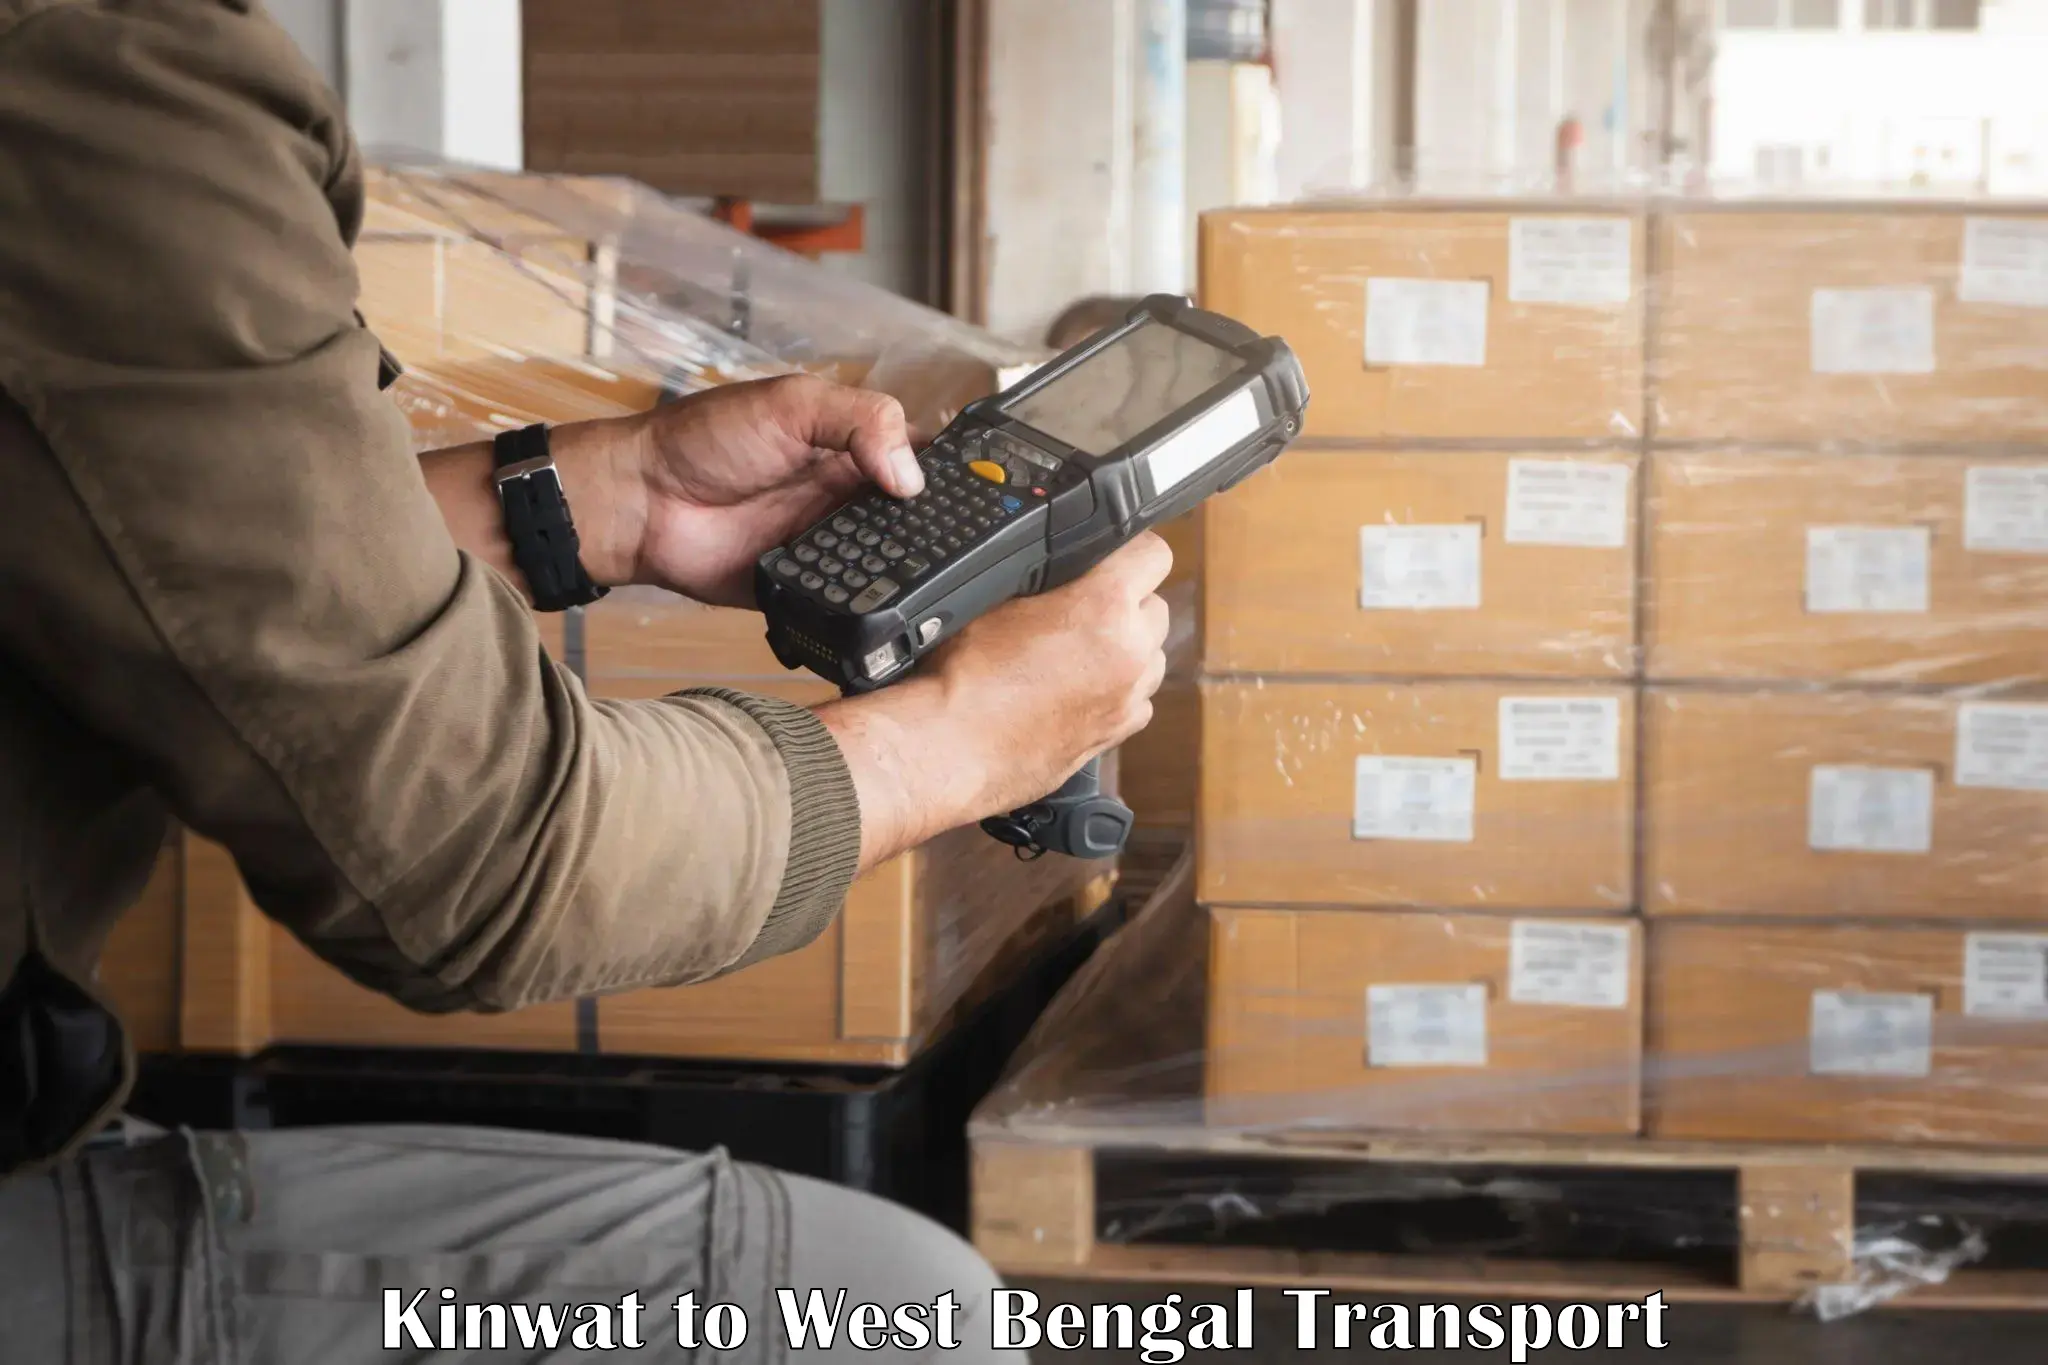 Cargo train transport services Kinwat to West Bengal